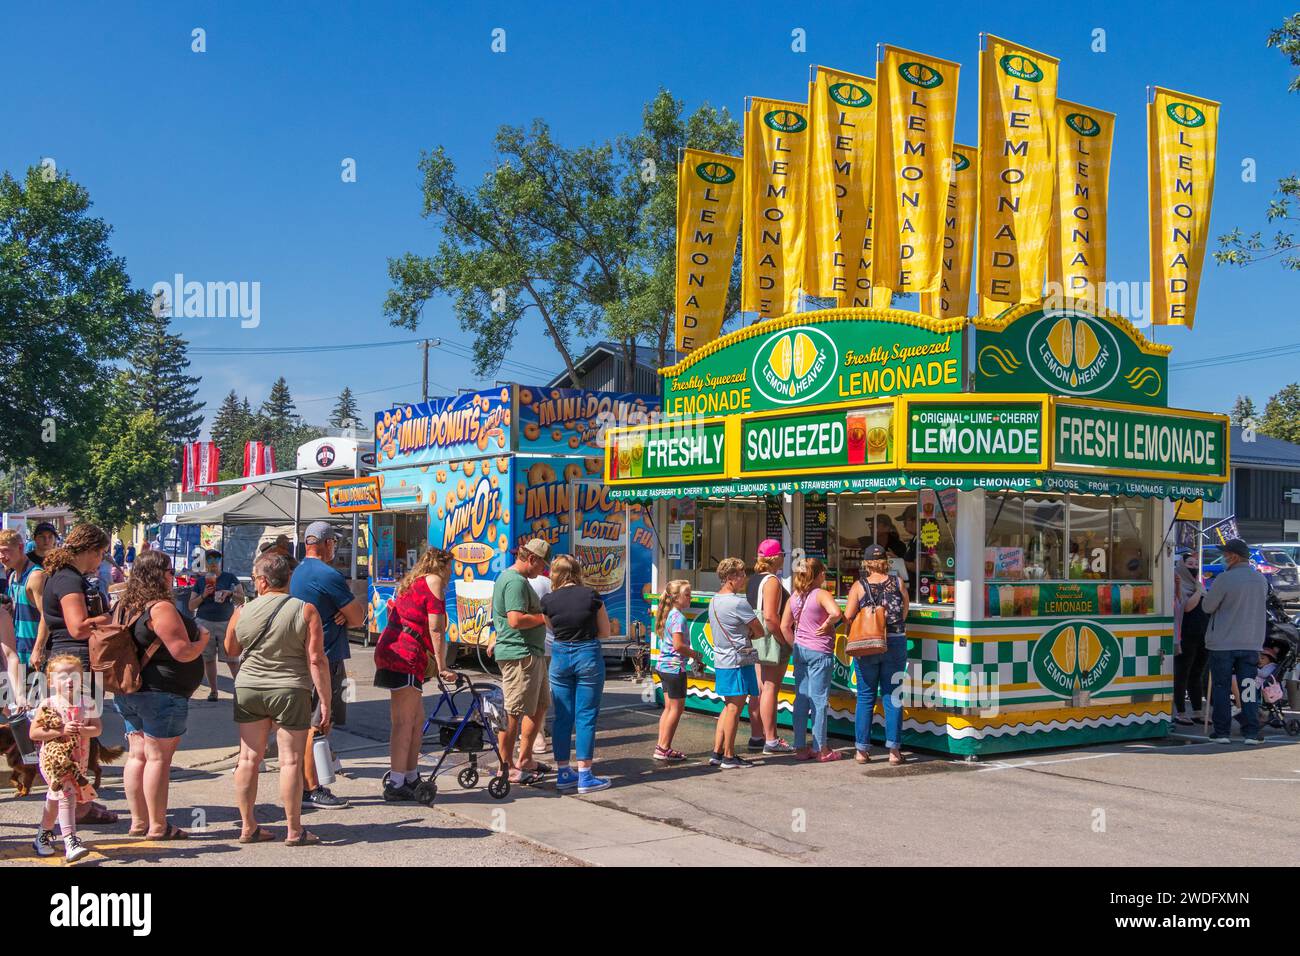 Food kiosks at the Corn and Apple Festival in Morden, Manitoba, Canada. Stock Photo